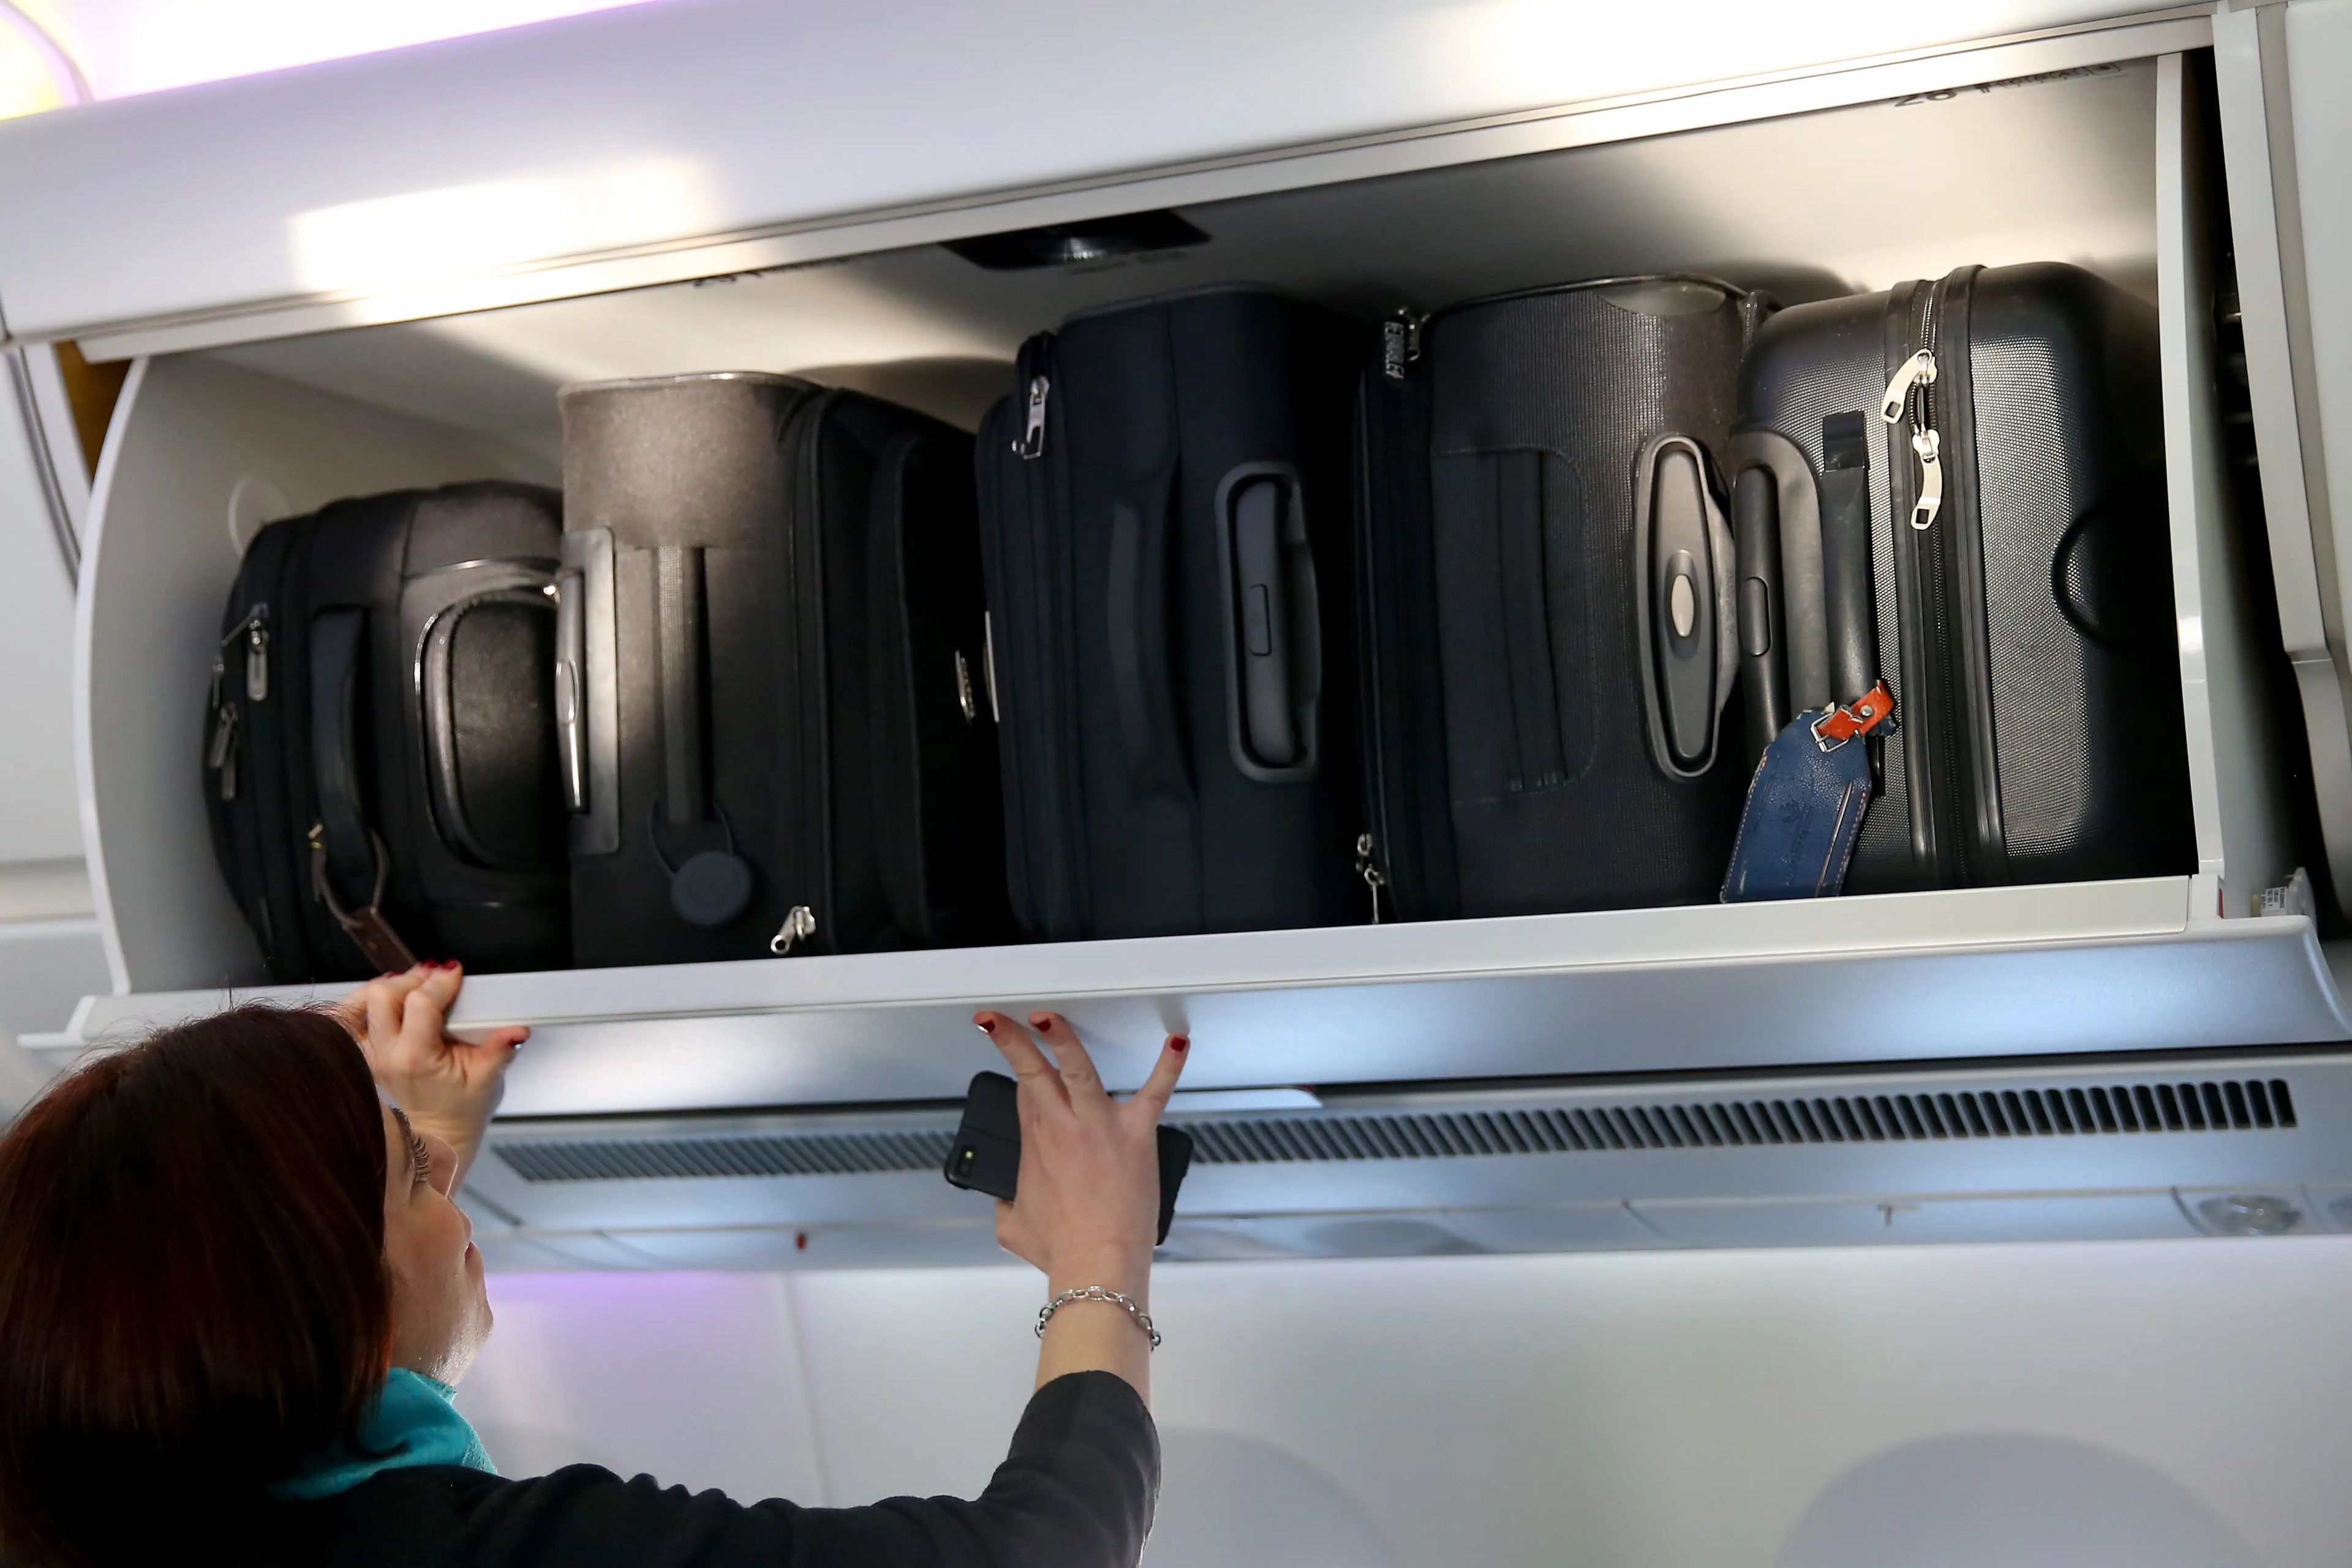 The hand baggage overhead bins in the cabin of a passenger plane